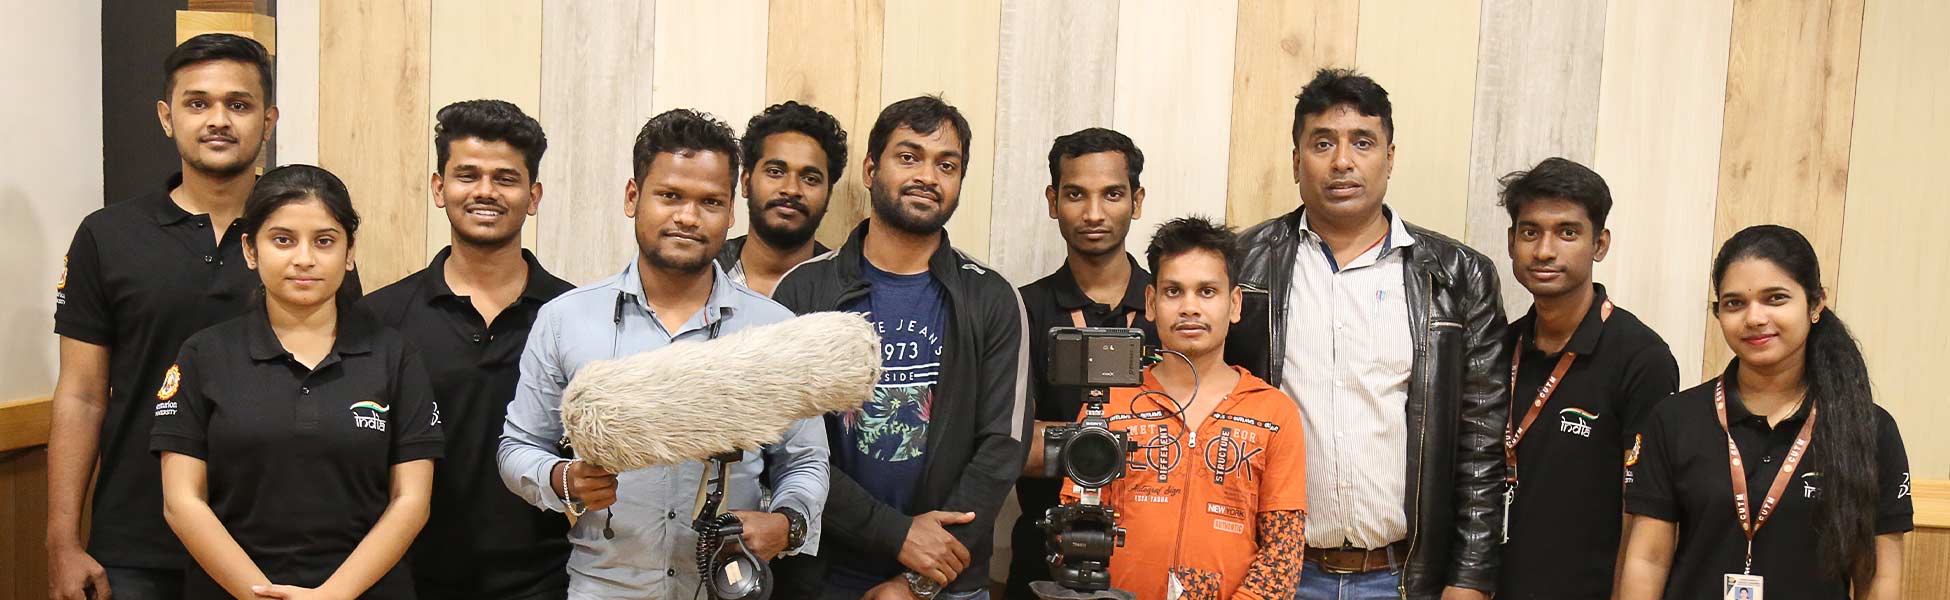 film production services in Anupgarh, video production services in Anupgarh, tv production services in Anupgarh, production services in Anupgarh